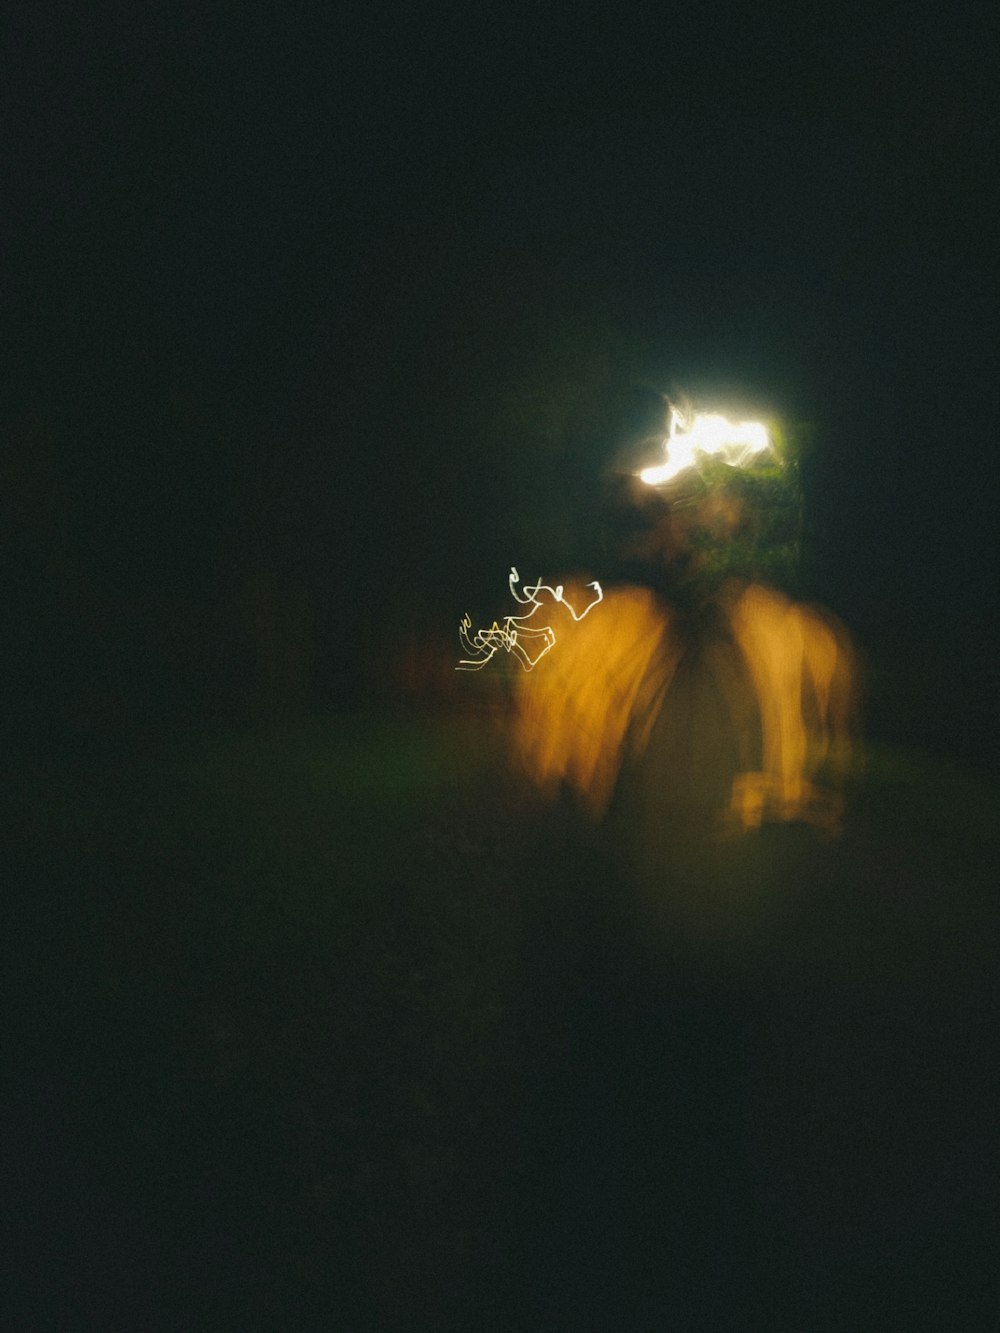 a blurry photo of a person walking in the dark